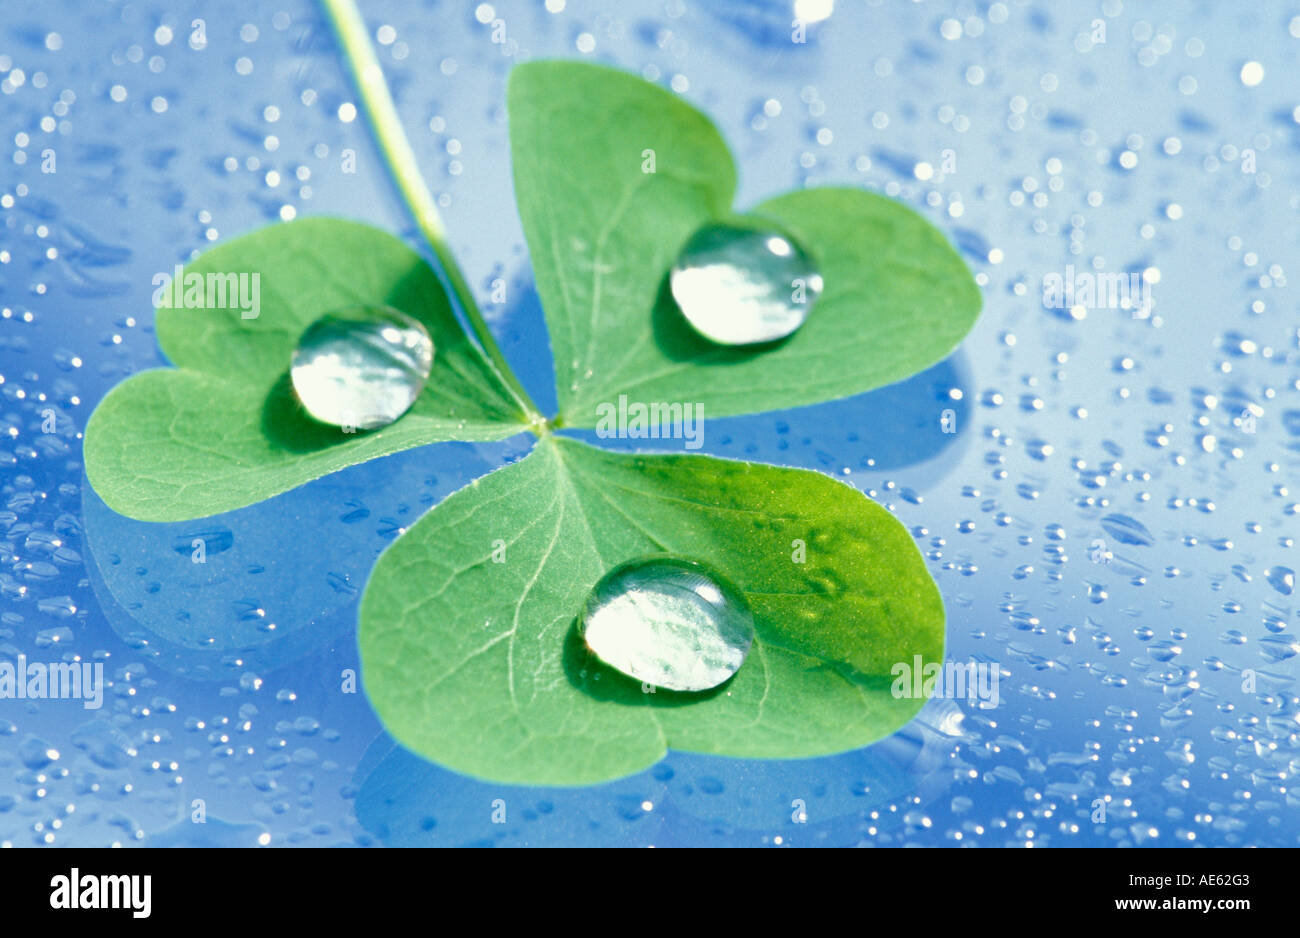 Cloverleaf with drops of water Stock Photo